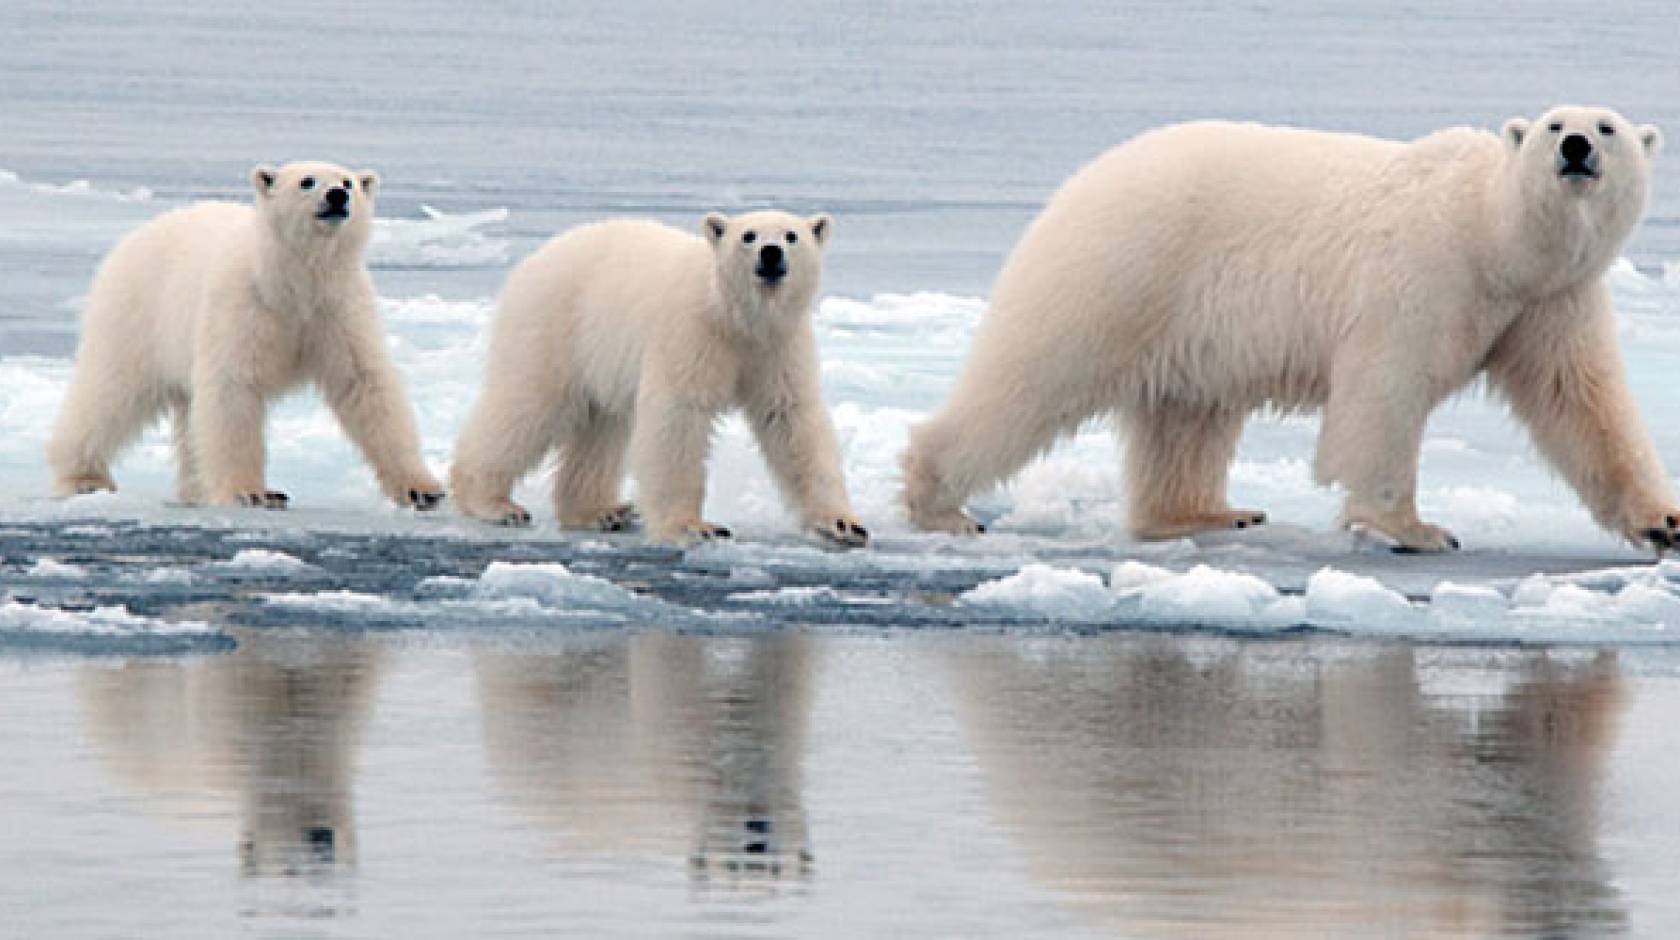 Polar bear genome gives new insight into adaptations to high-fat diet